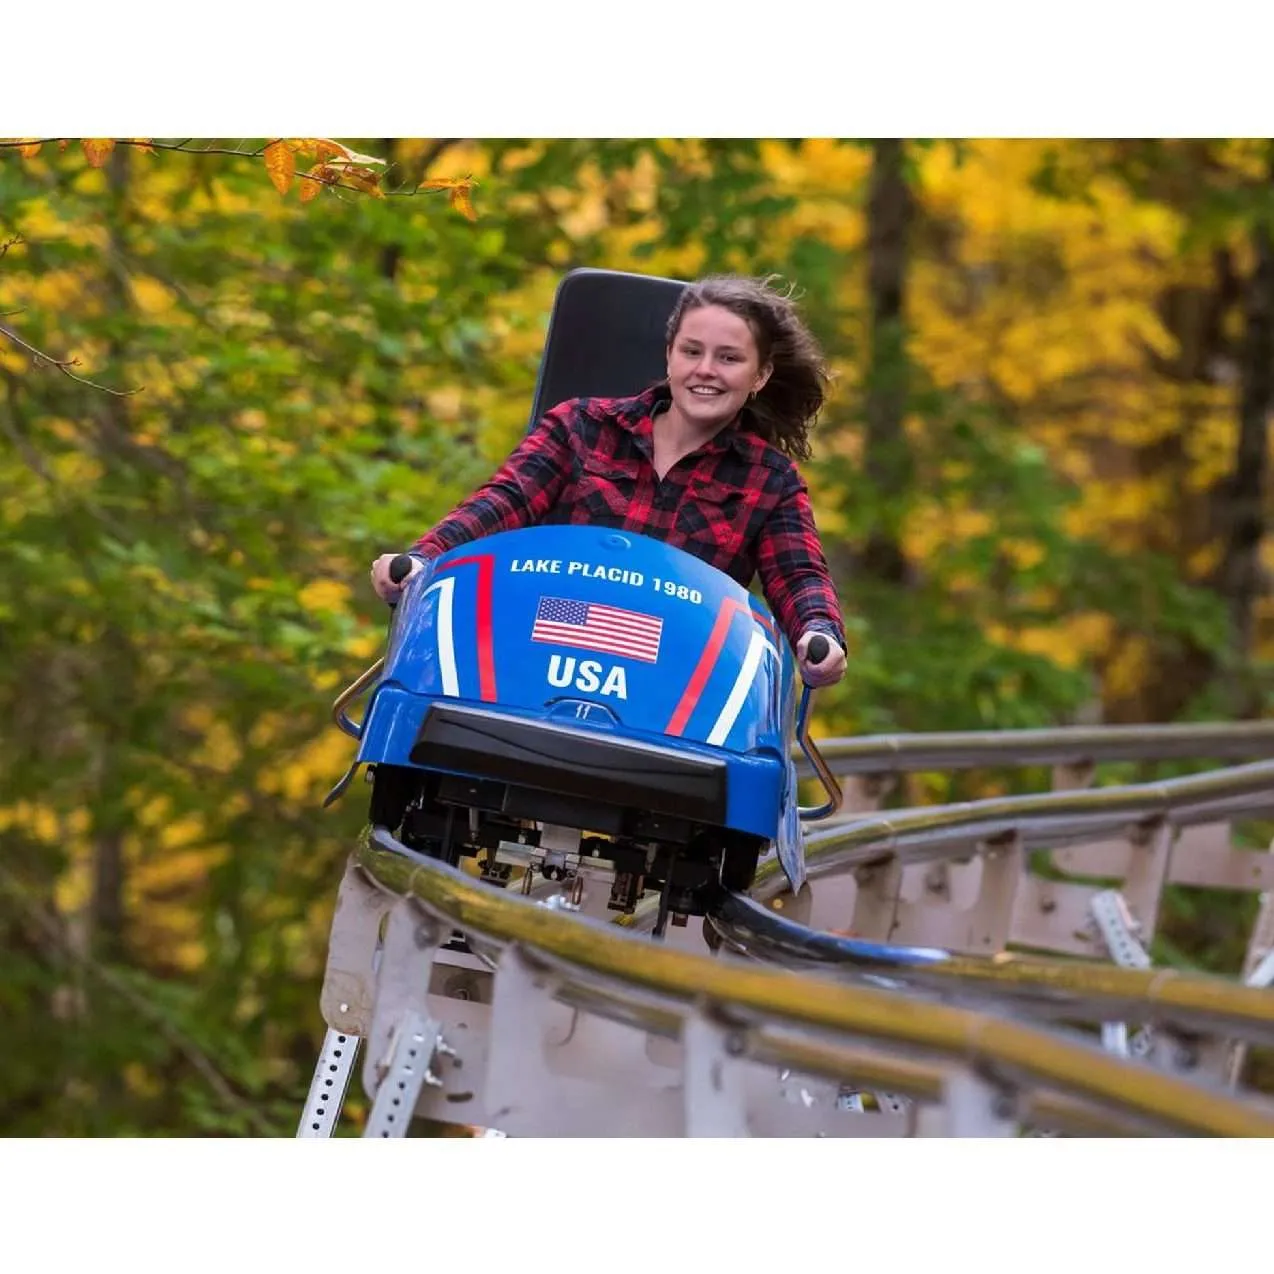 A woman in a red plaid shirt riding a single-person coaster outdoors